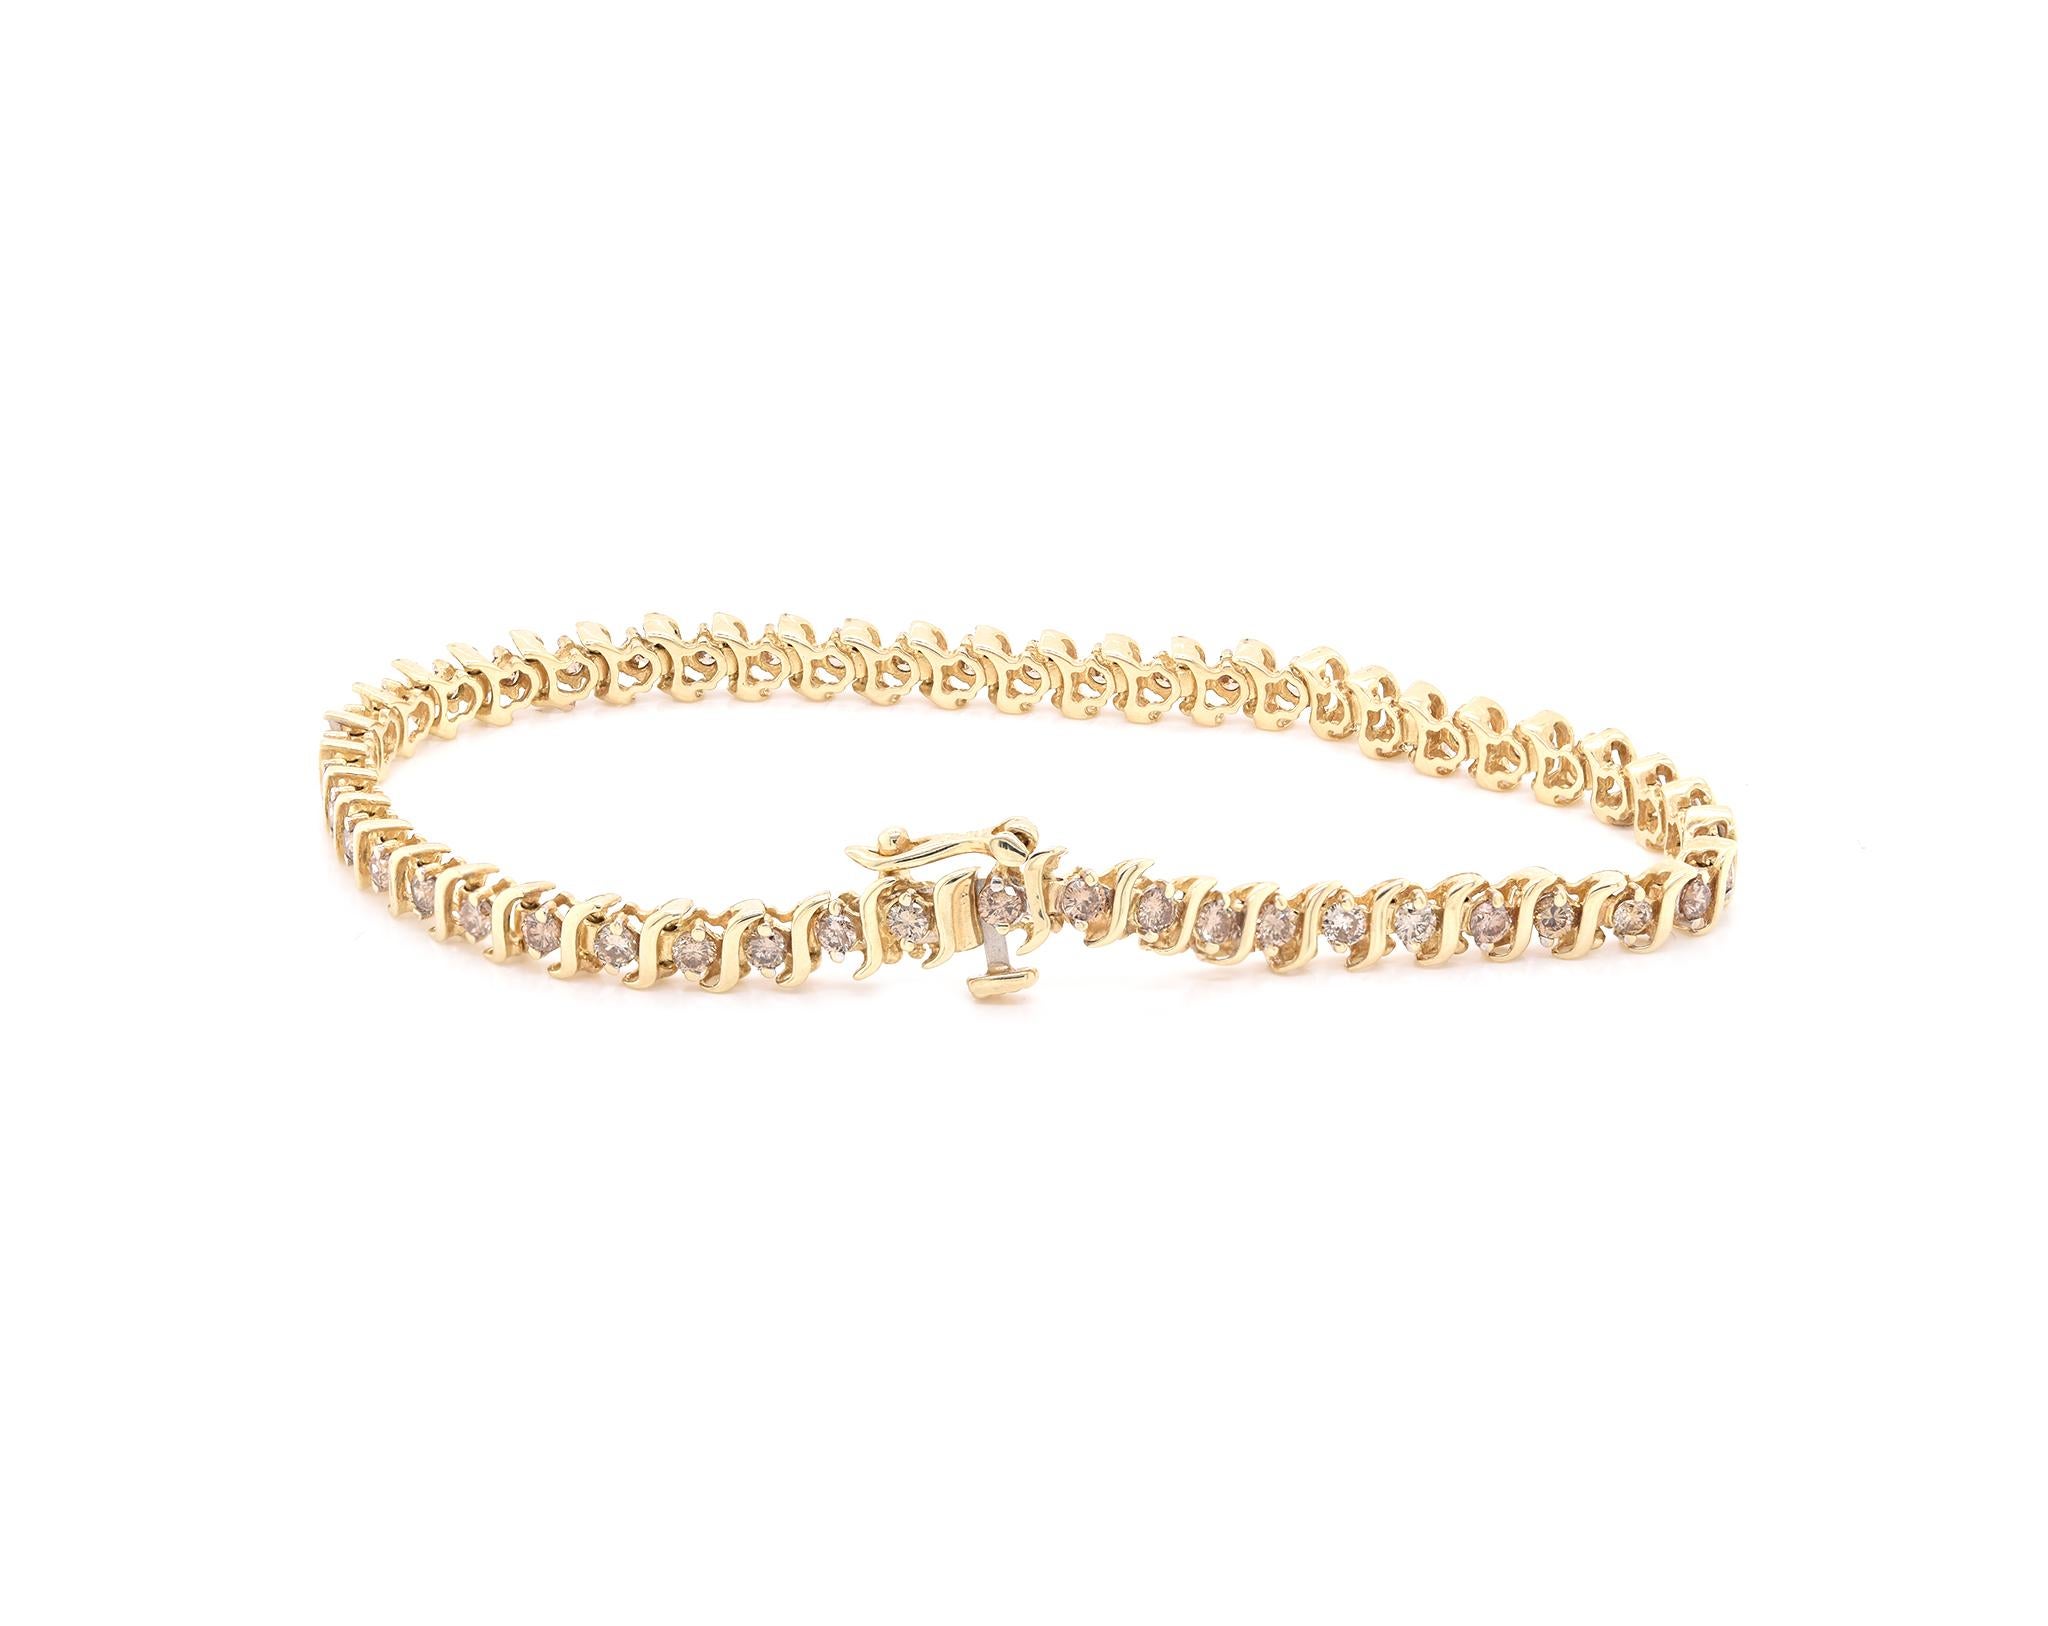 Designer: custom
Material: 14K yellow gold 
Diamond: 49 round cut = 1.96cttw
Color: Champagne
Clarity: SI1
Weight:  8.27 grams
Dimensions: bracelet measures 7-inches long
